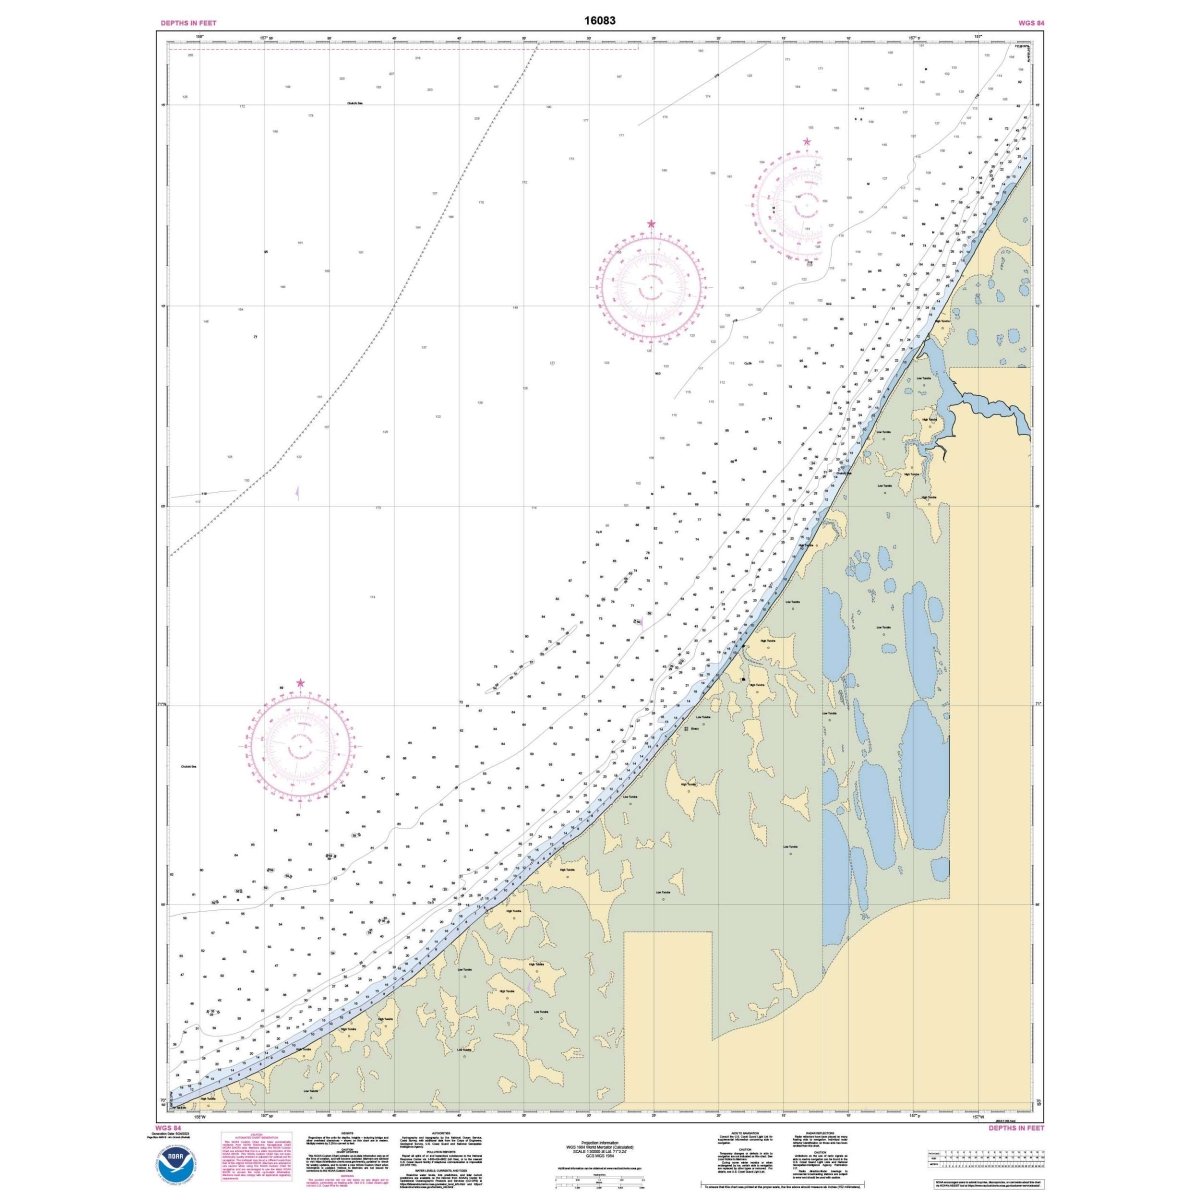 Historical NOAA Chart 16083: Skull Cliff and vicinity - Life Raft Professionals